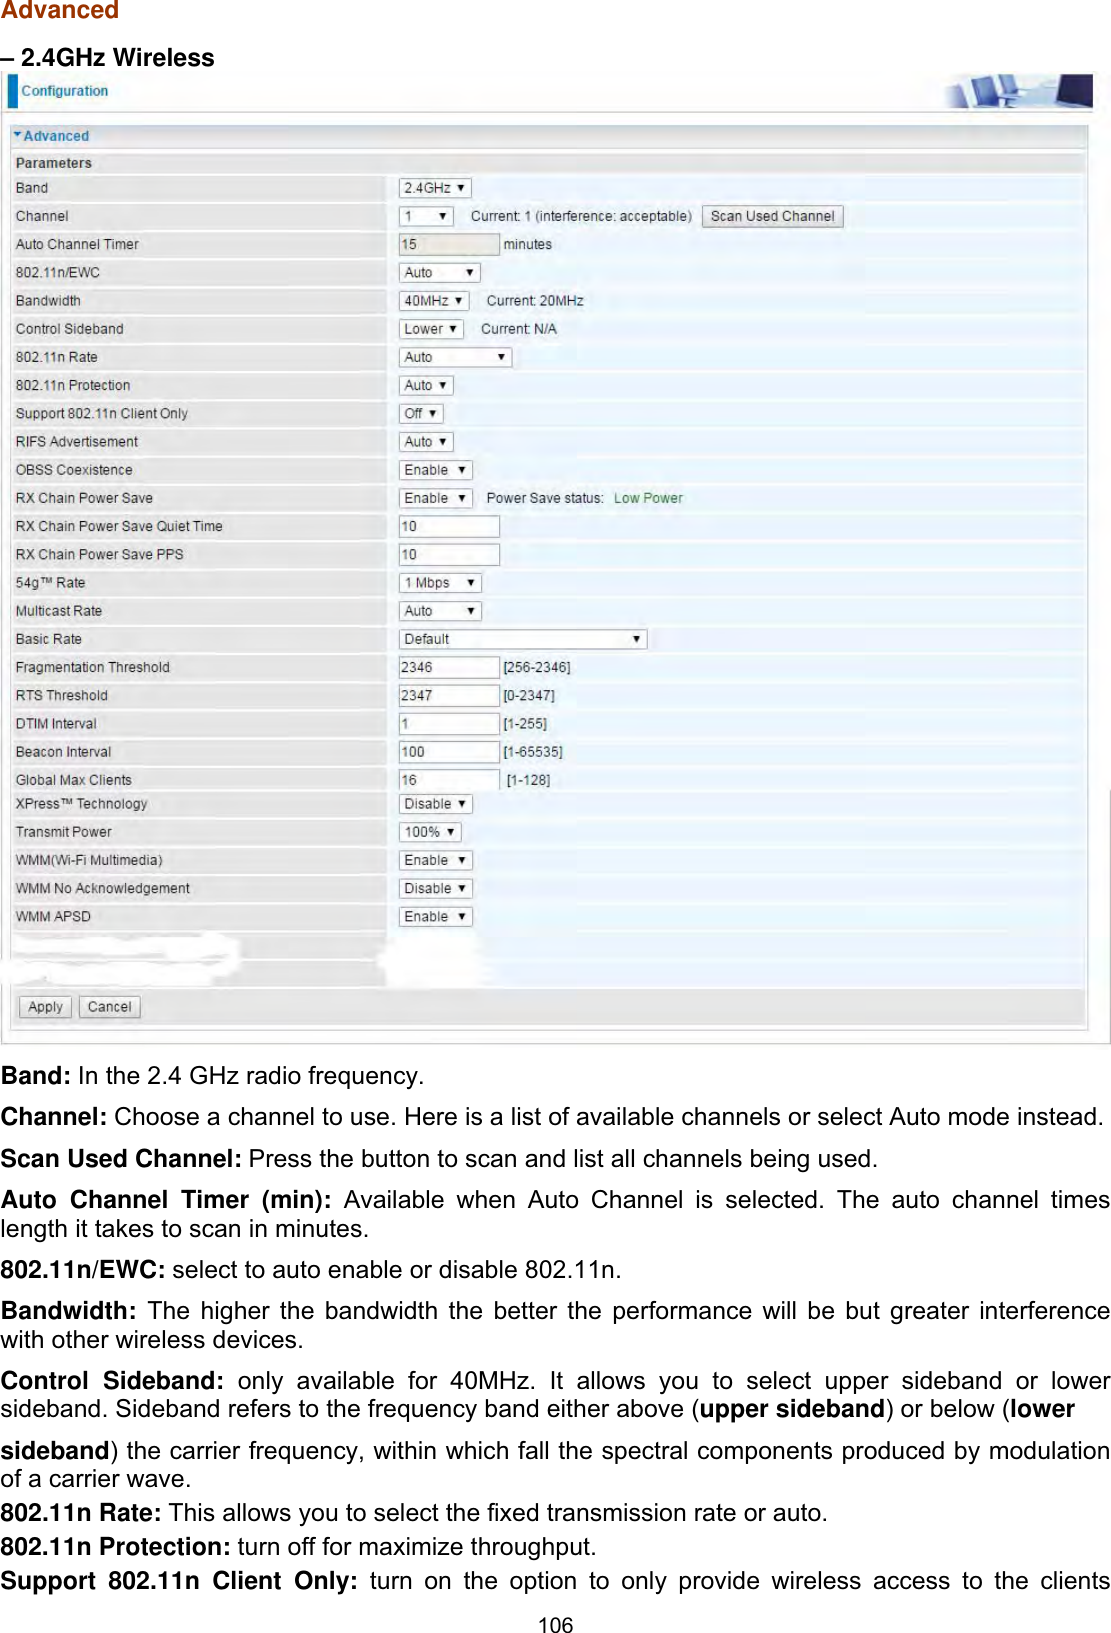 106Advanced – 2.4GHz Wireless Band: In the 2.4 GHz radio frequency.Channel: Choose a channel to use. Here is a list of available channels or select Auto mode instead.Scan Used Channel: Press the button to scan and list all channels being used.Auto Channel Timer (min): Available when Auto Channel is selected. The auto channel times length it takes to scan in minutes.802.11n/EWC: select to auto enable or disable 802.11n.  Bandwidth:  The higher the bandwidth the better the performance will be but greater interference with other wireless devices.Control Sideband: only available for 40MHz. It allows you to select upper sideband or lower sideband. Sideband refers to the frequency band either above (upper sideband) or below (lower sideband) the carrier frequency, within which fall the spectral components produced by modulation of a carrier wave.802.11n Rate: This allows you to select the fixed transmission rate or auto.802.11n Protection: turn off for maximize throughput.  Support 802.11n Client Only: turn on the option to only provide wireless access to the clients 